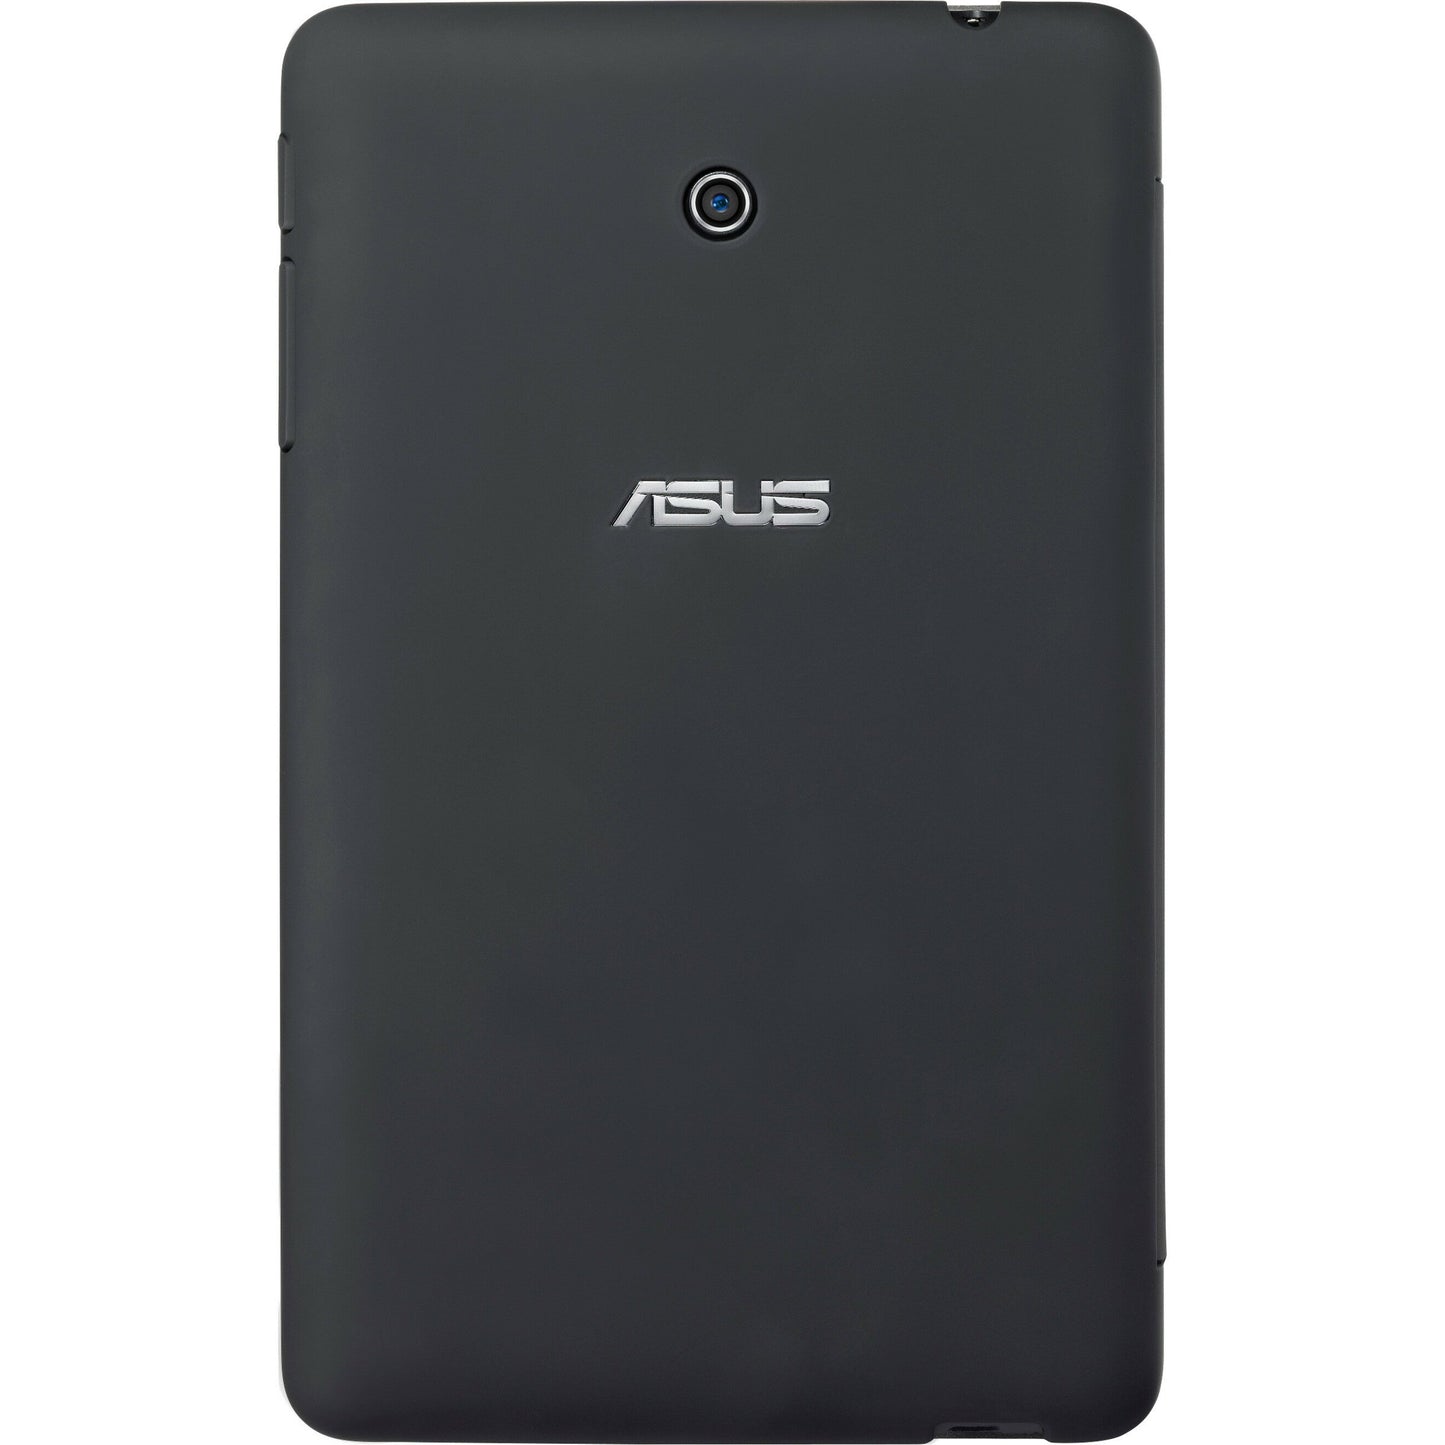 Asus TriCover Carrying Case for 8" Tablet - Gray